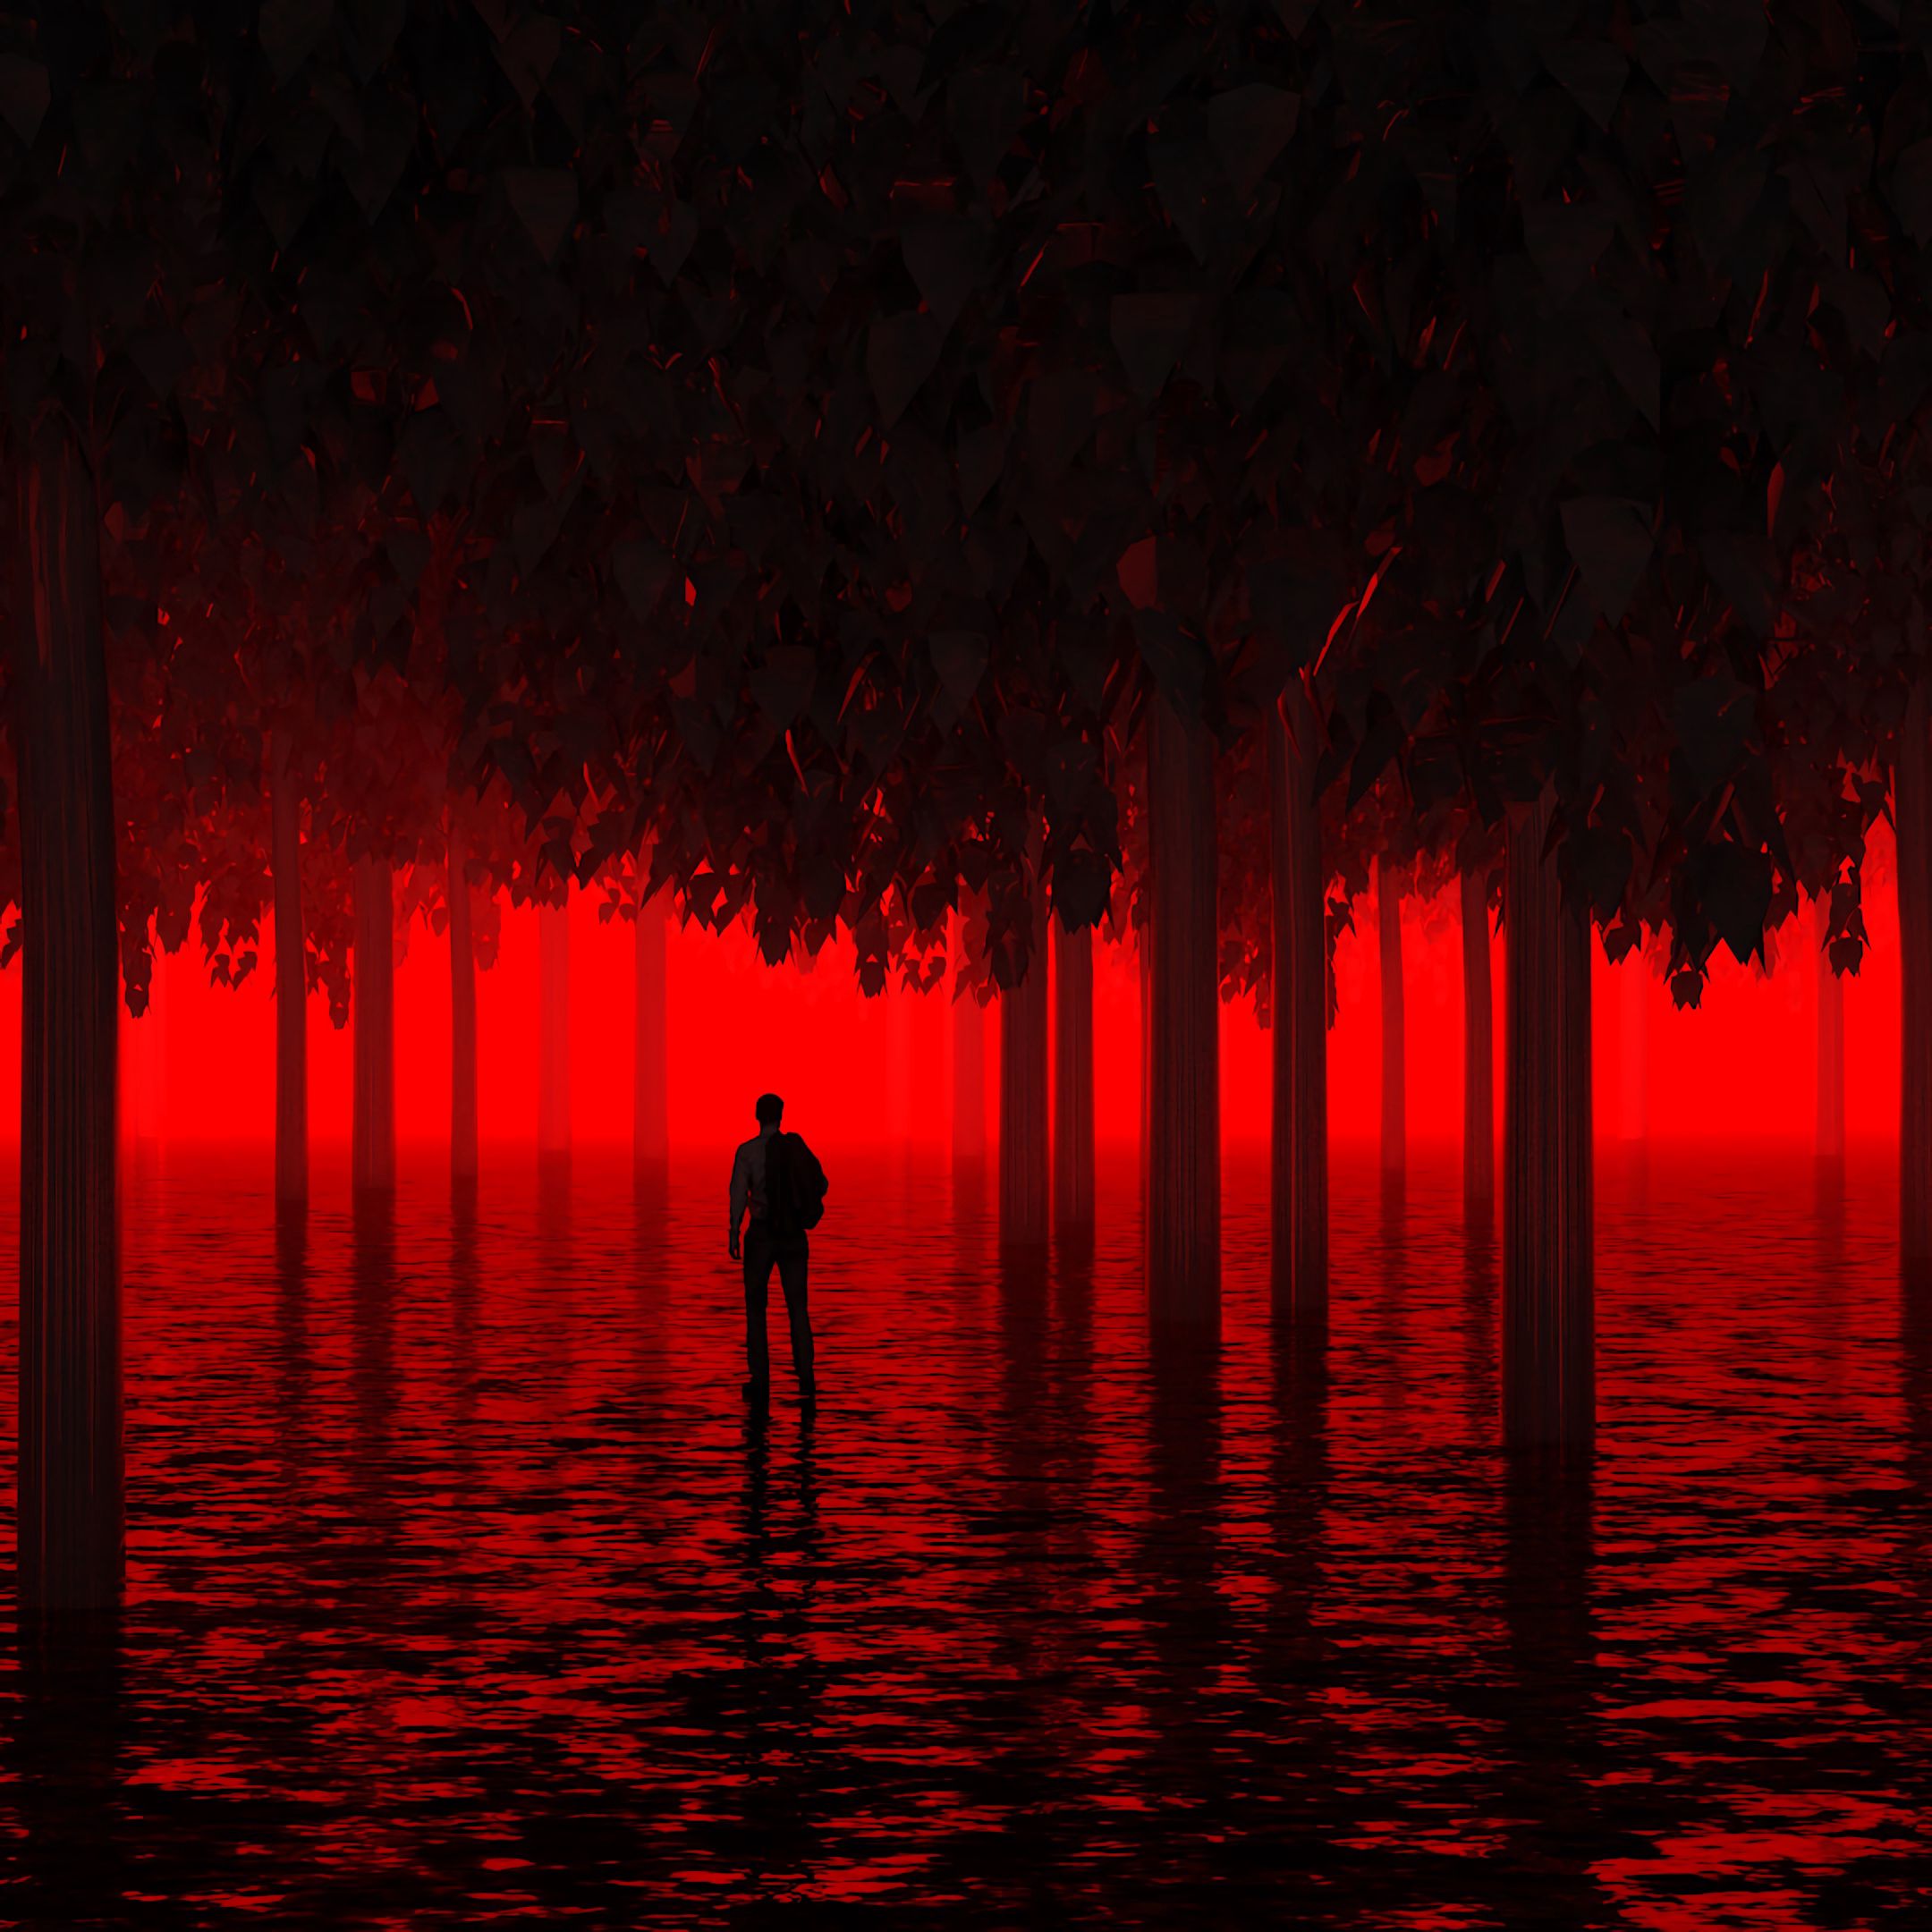 light, neon, human, dark, water, trees, red, shine, person, flooded, submerged